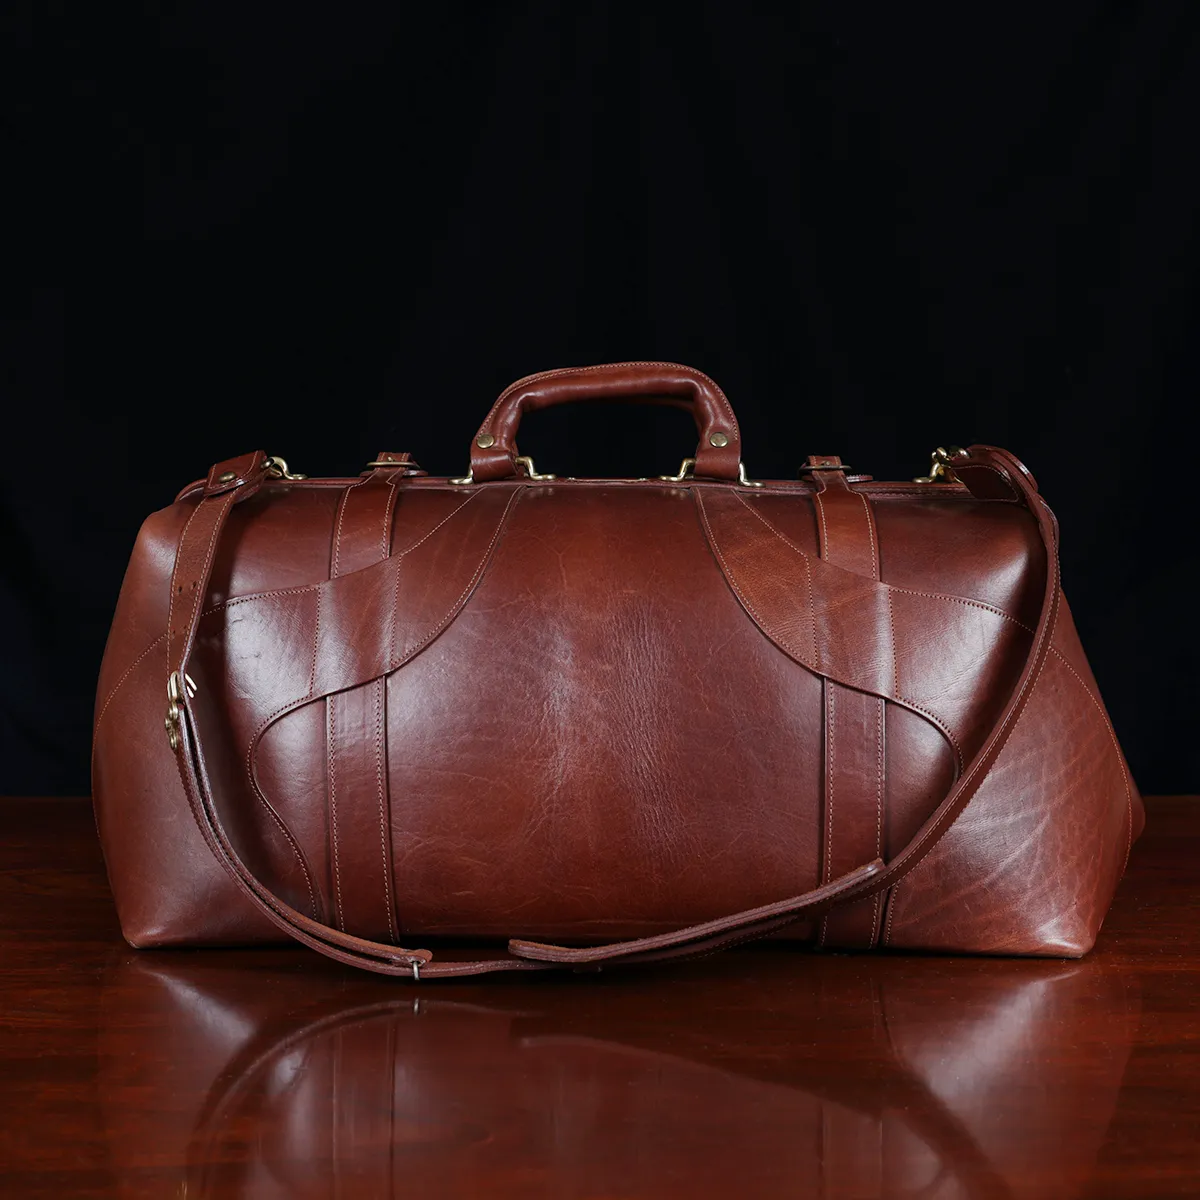 No. 5 Grip in Vintage Brown Steerhide - back view- on a wood table with a dark background